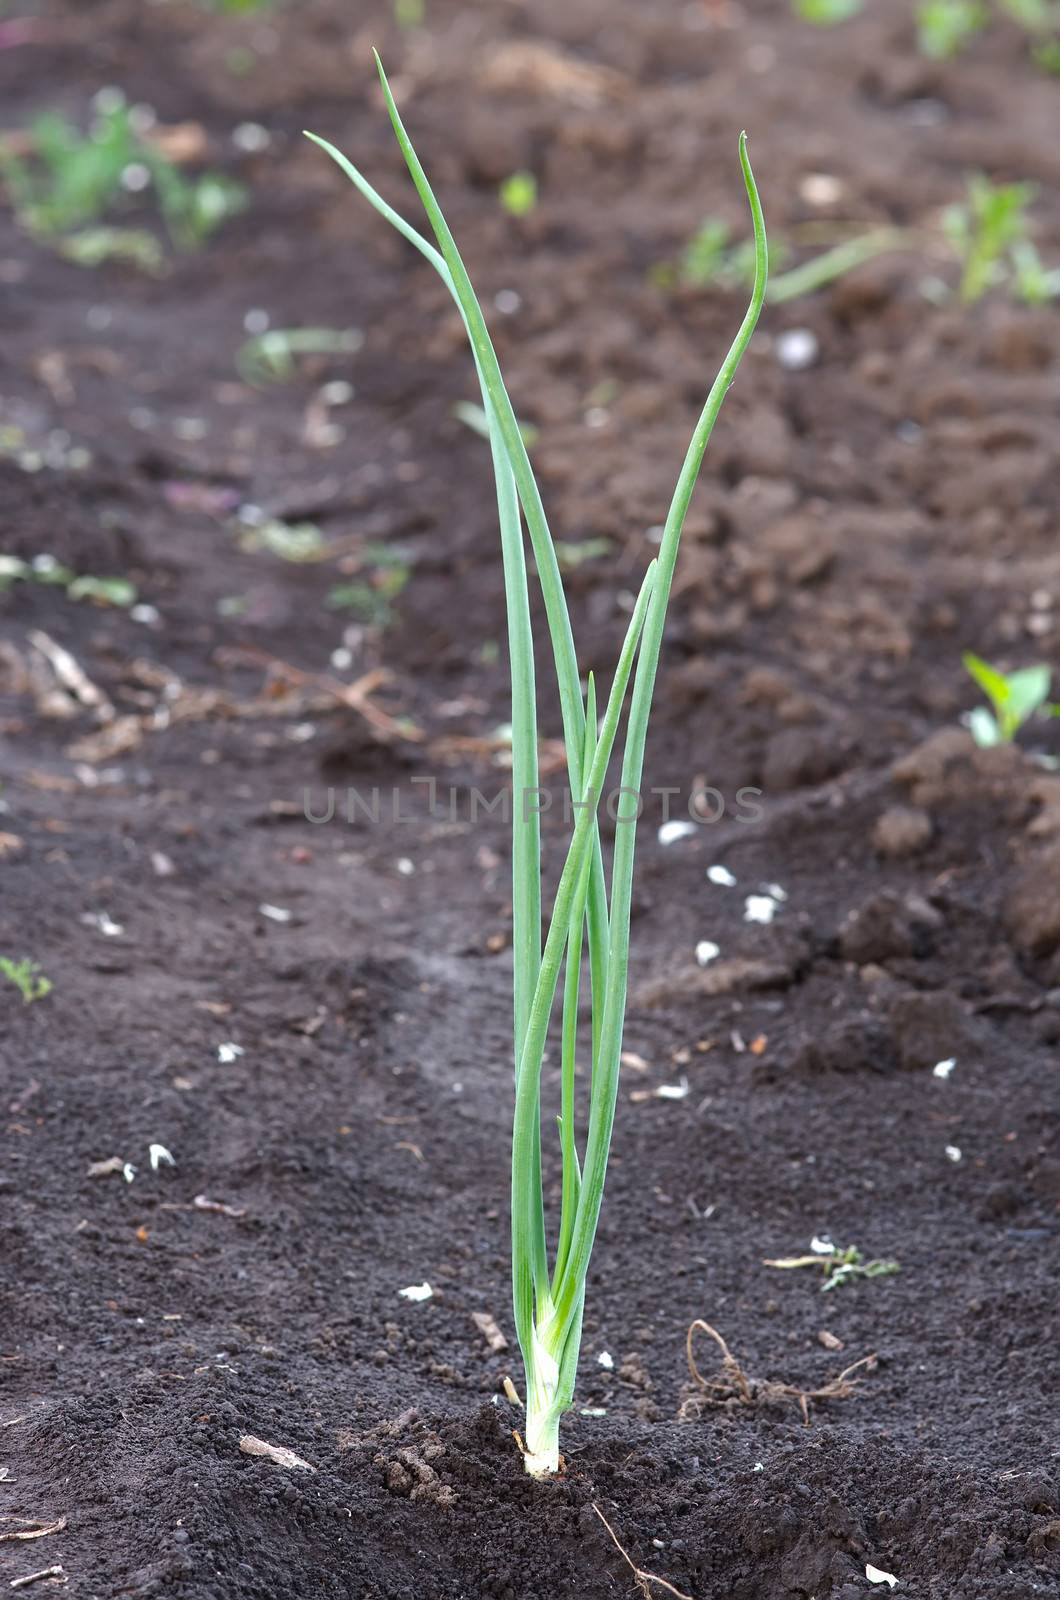 A single stalk of green onion on the ground